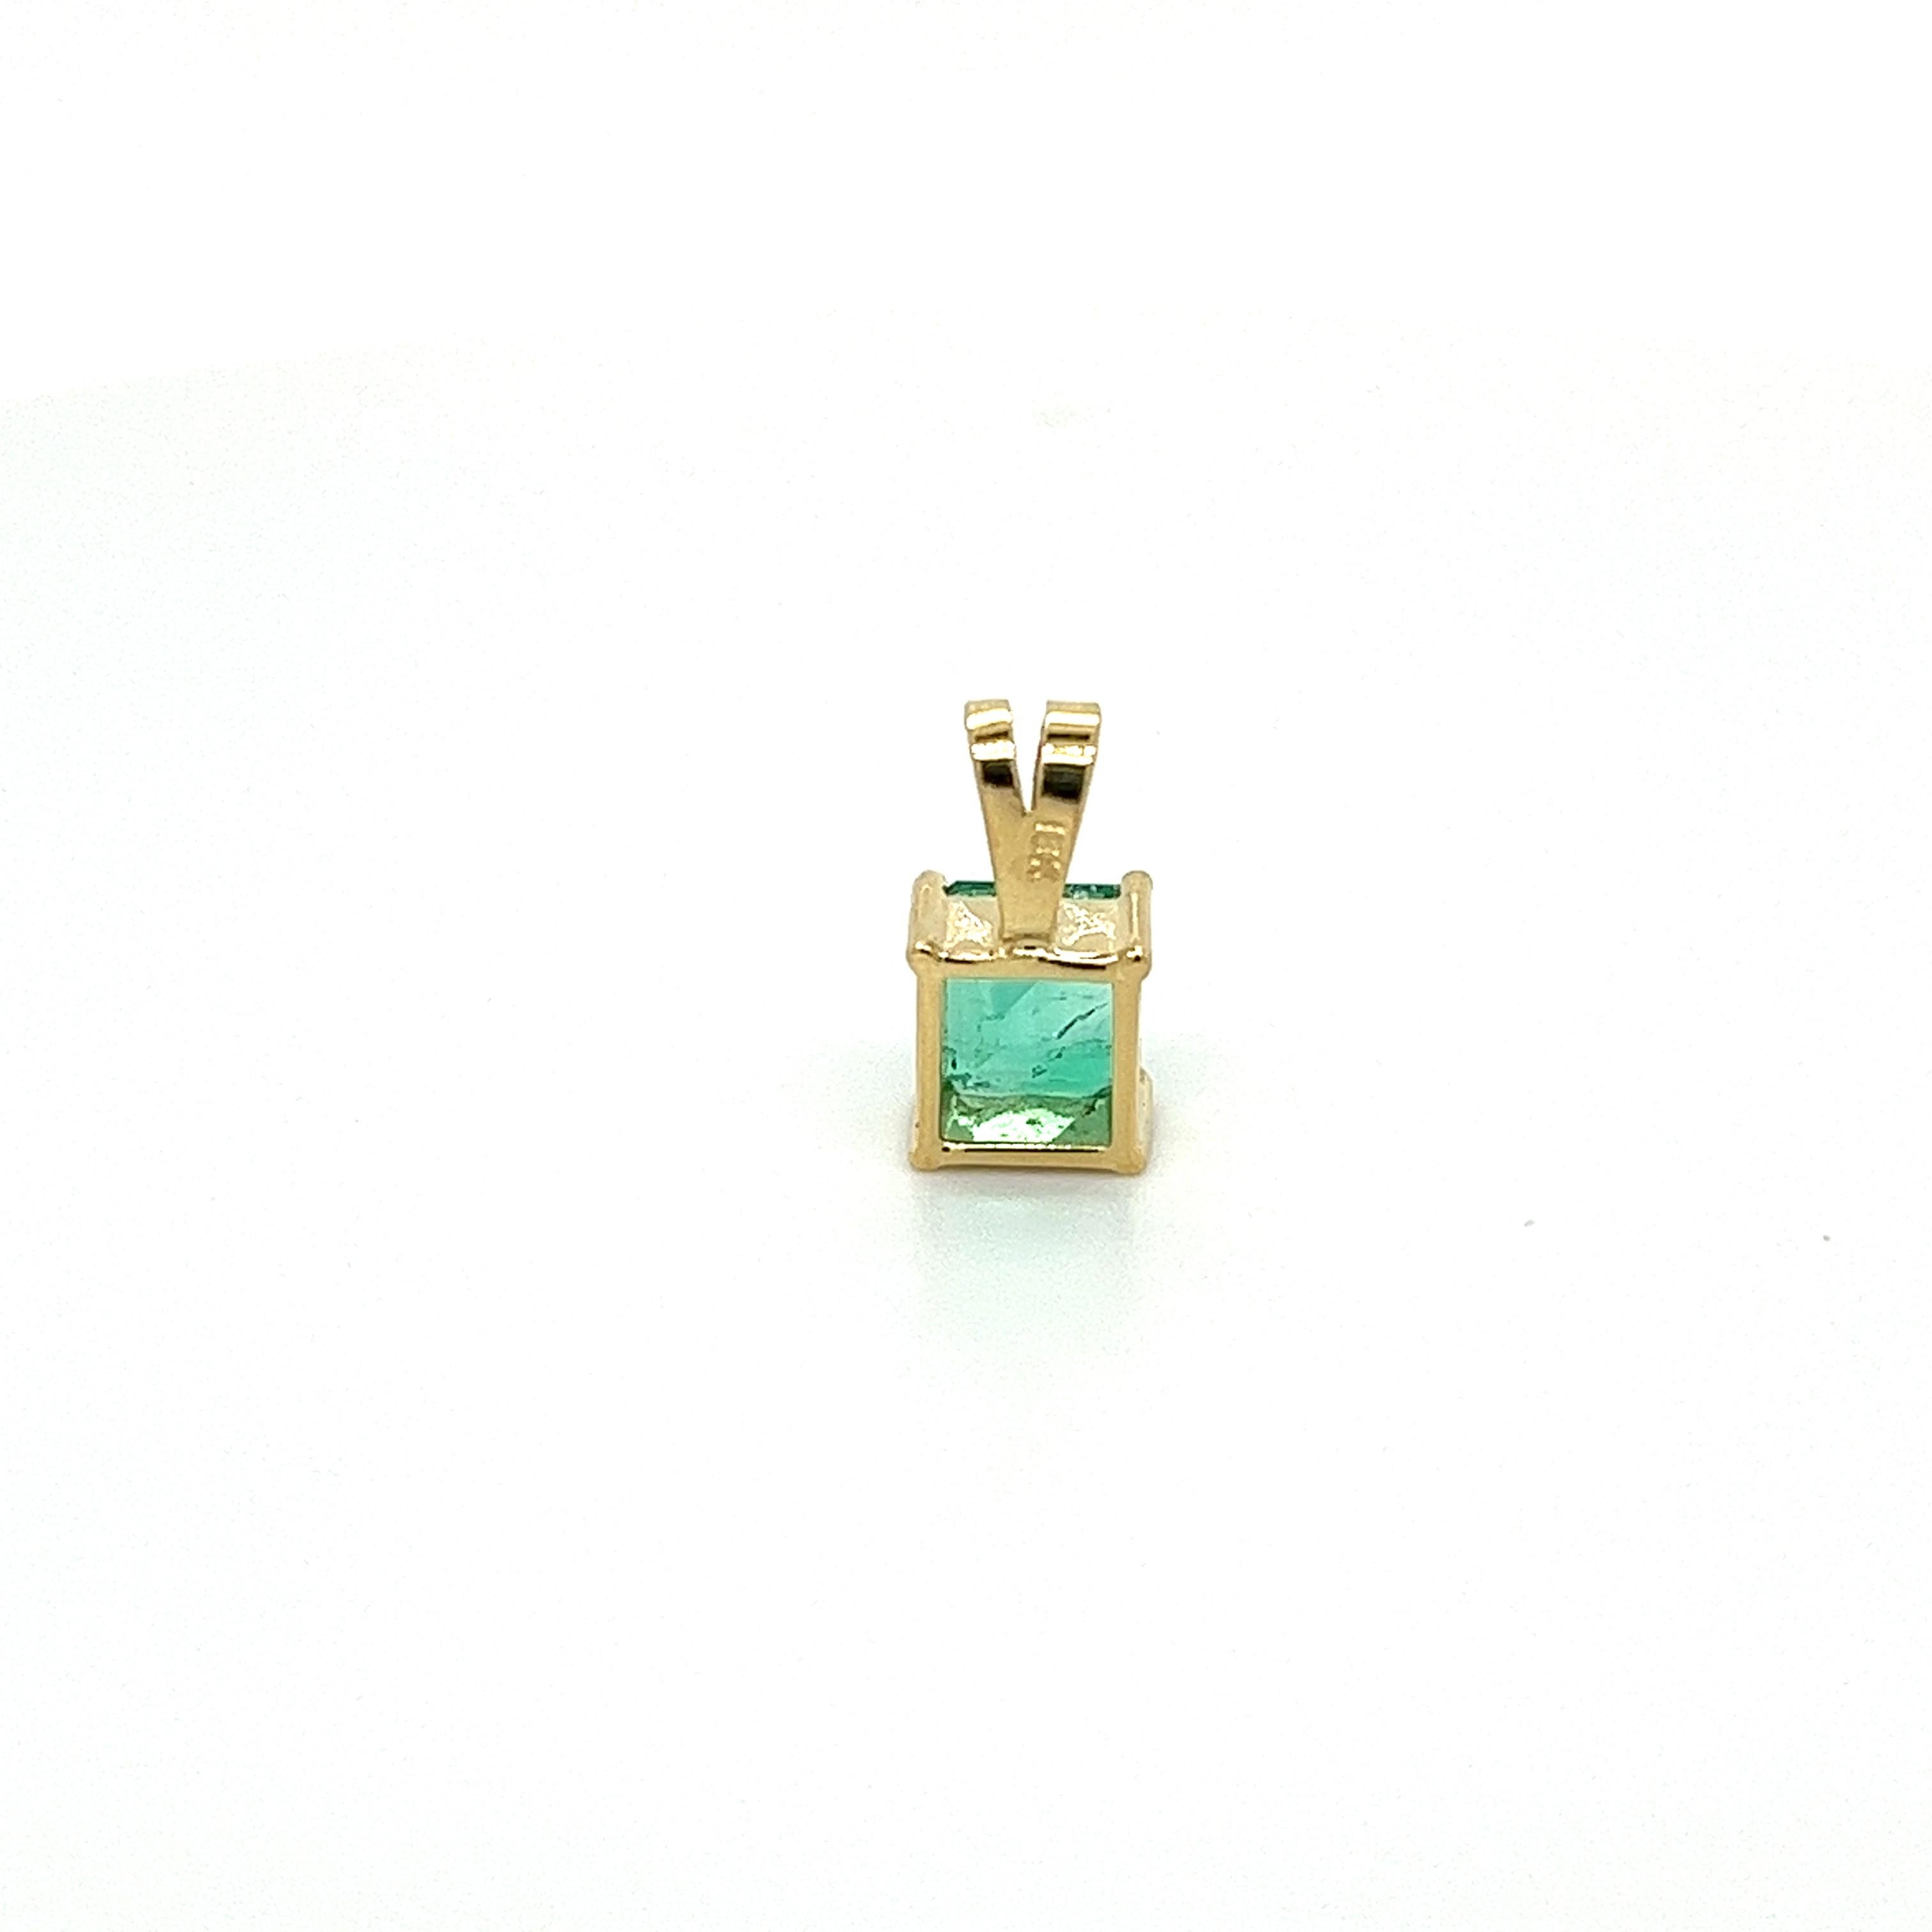 Emerald Cut 1.20 Carat Colombian Emerald Solitaire Pendant Necklace in 18K Yellow Gold